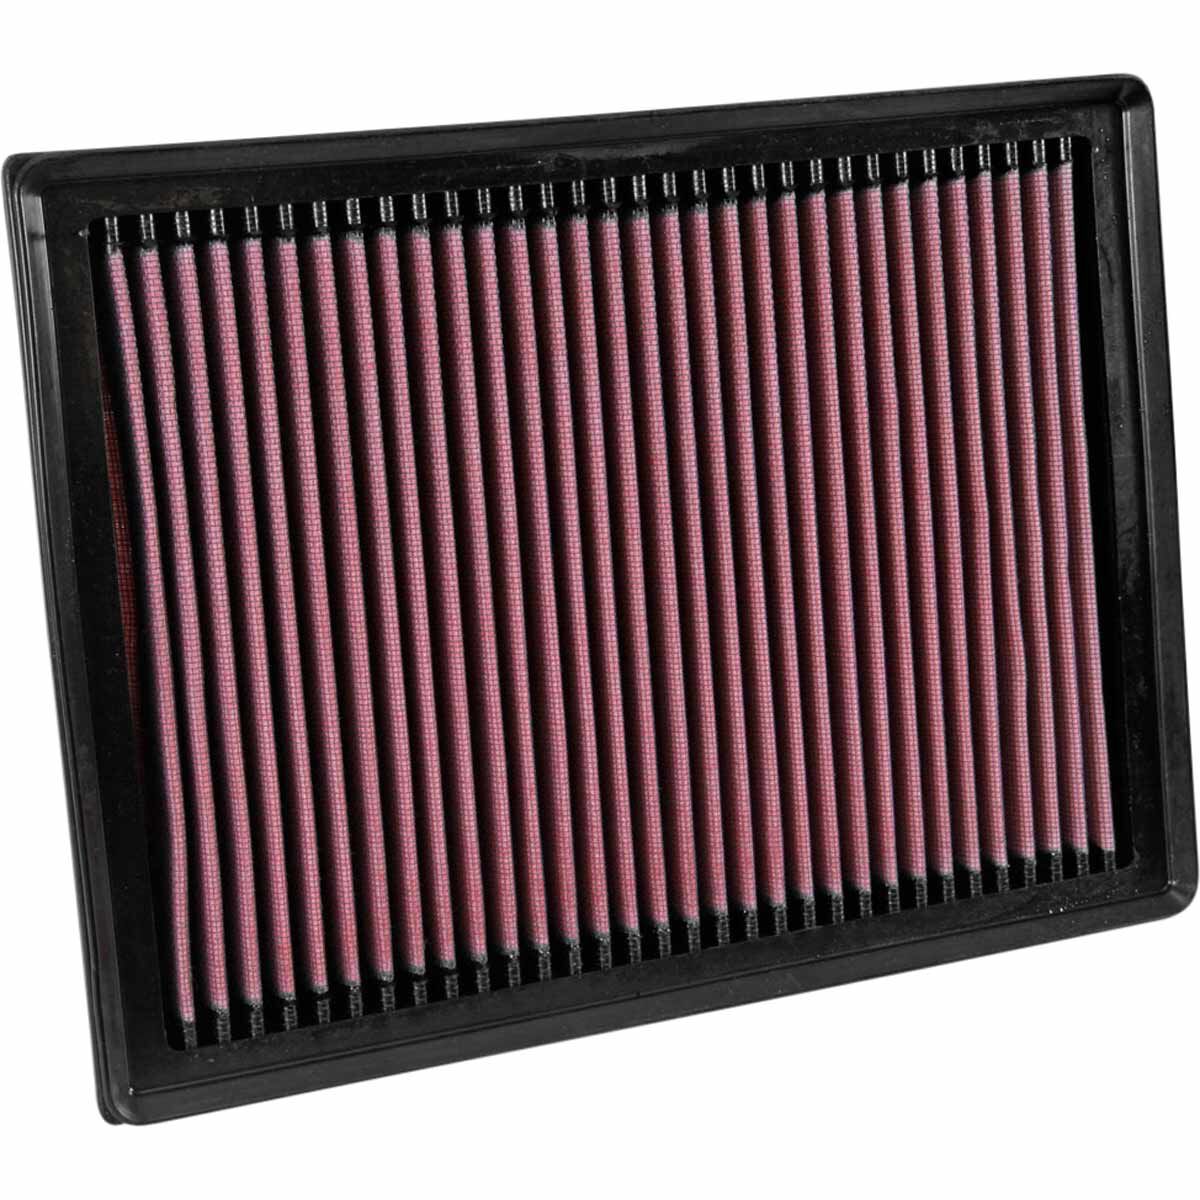 K&N Washable Air Filter 33-3045 (Interchangeable with A1876), , scaau_hi-res